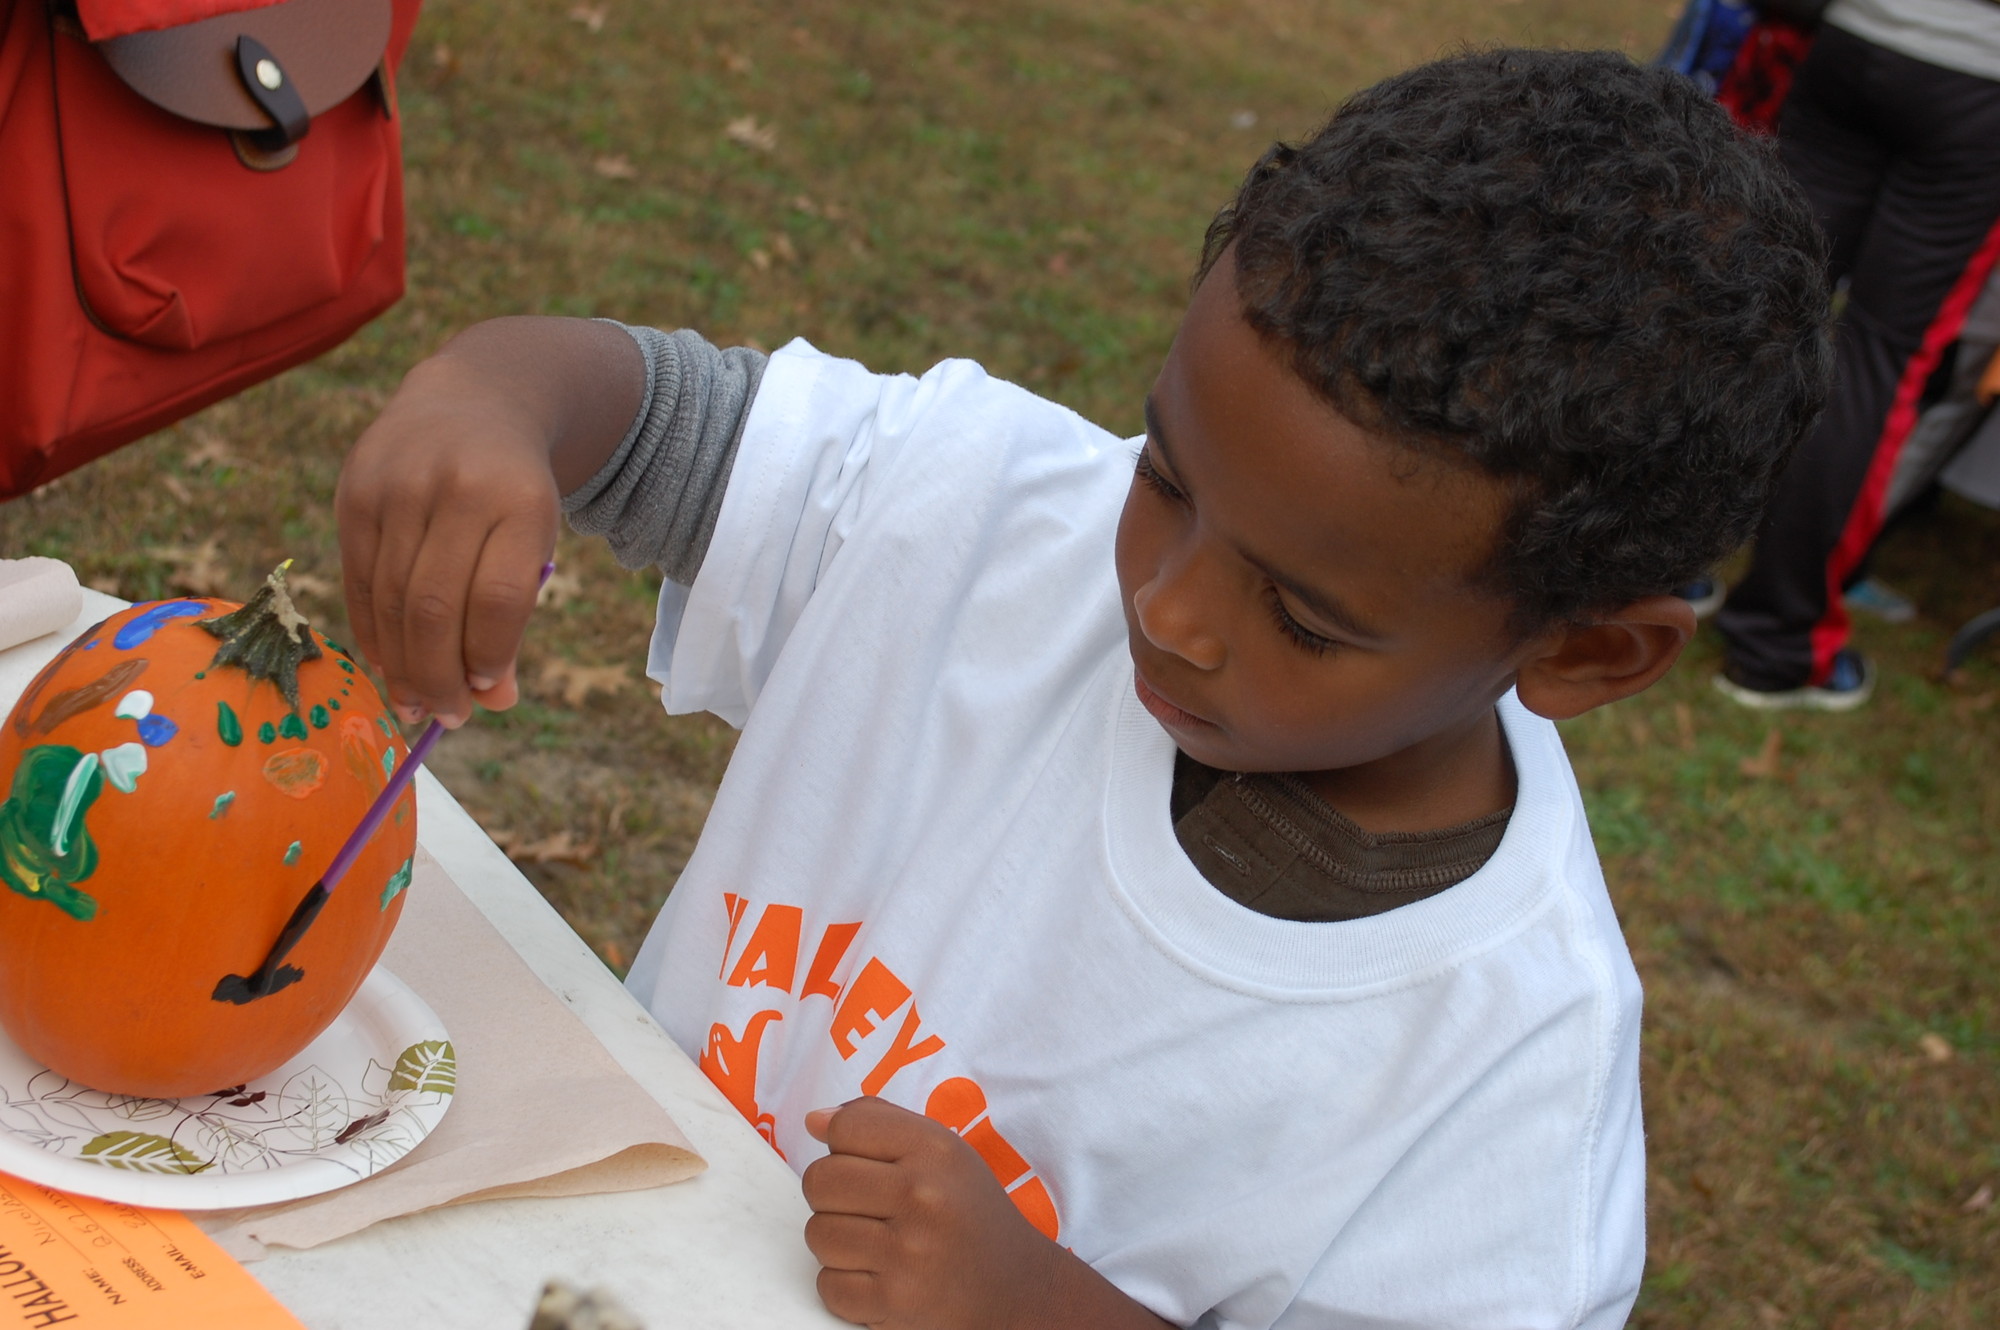 Nicholas LeBron, 5, was one of about 150 children who painted pumpkins.